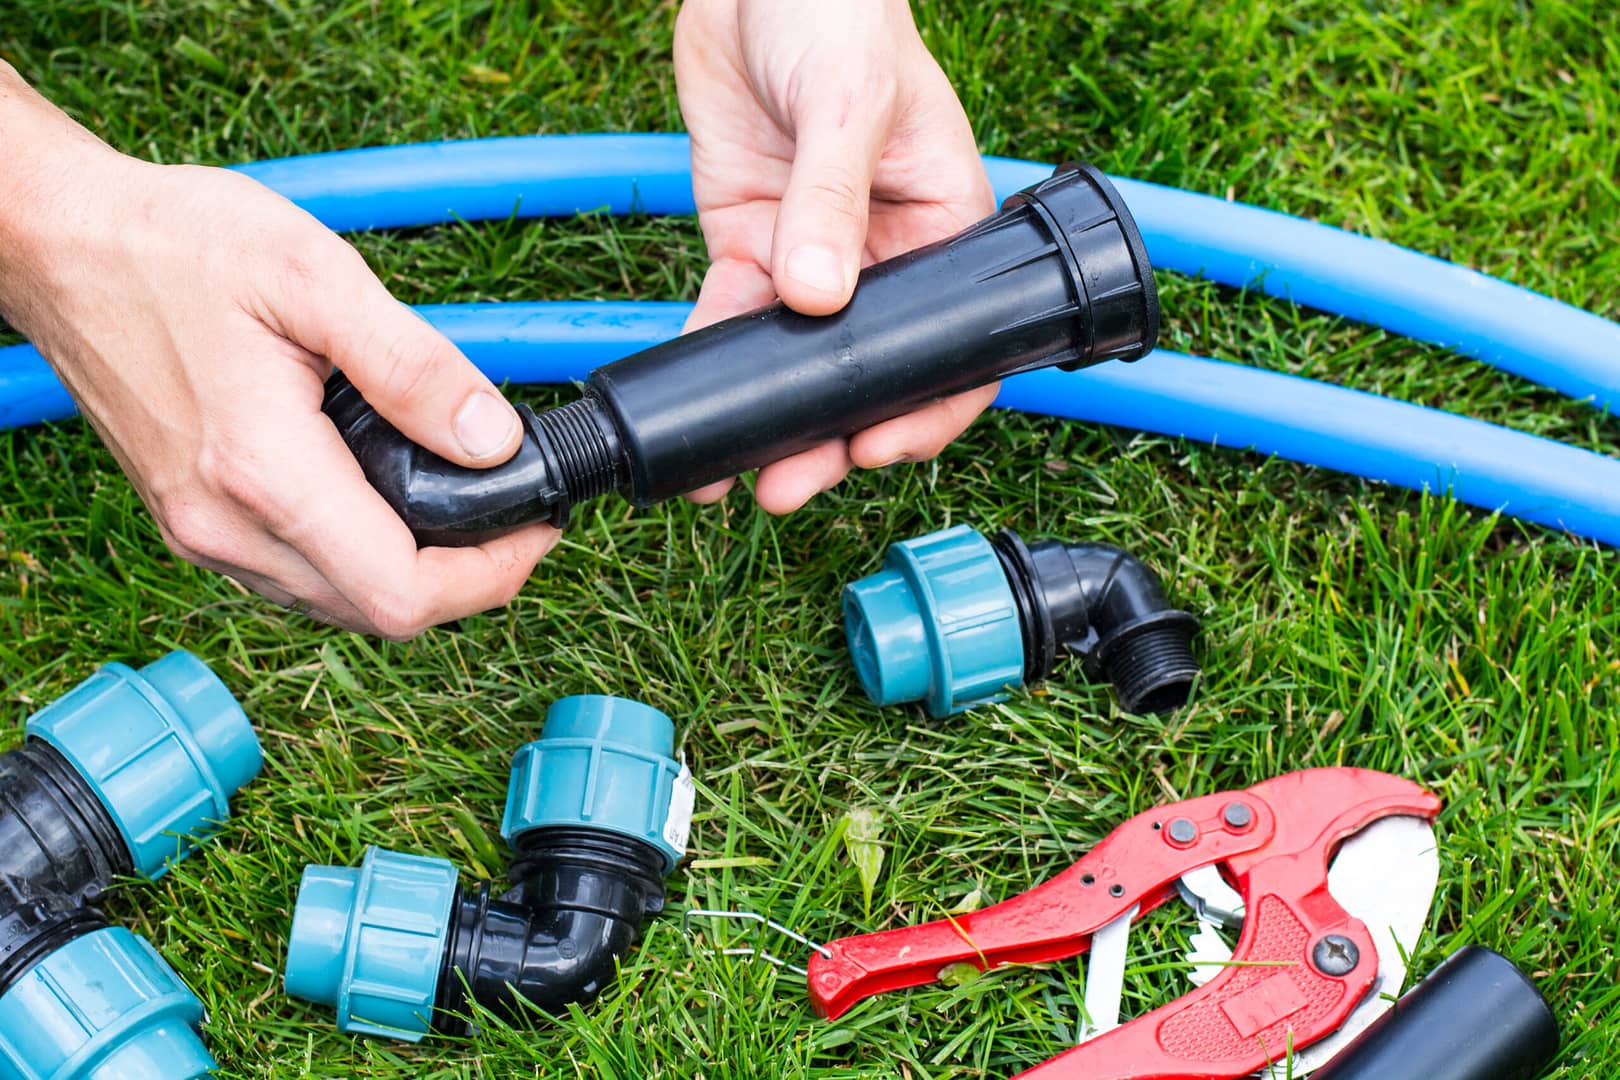 Colorful plastic pipes arranged neatly in a grass for an automatic garden irrigation system, showcasing efficient water distribution and gardening technology.